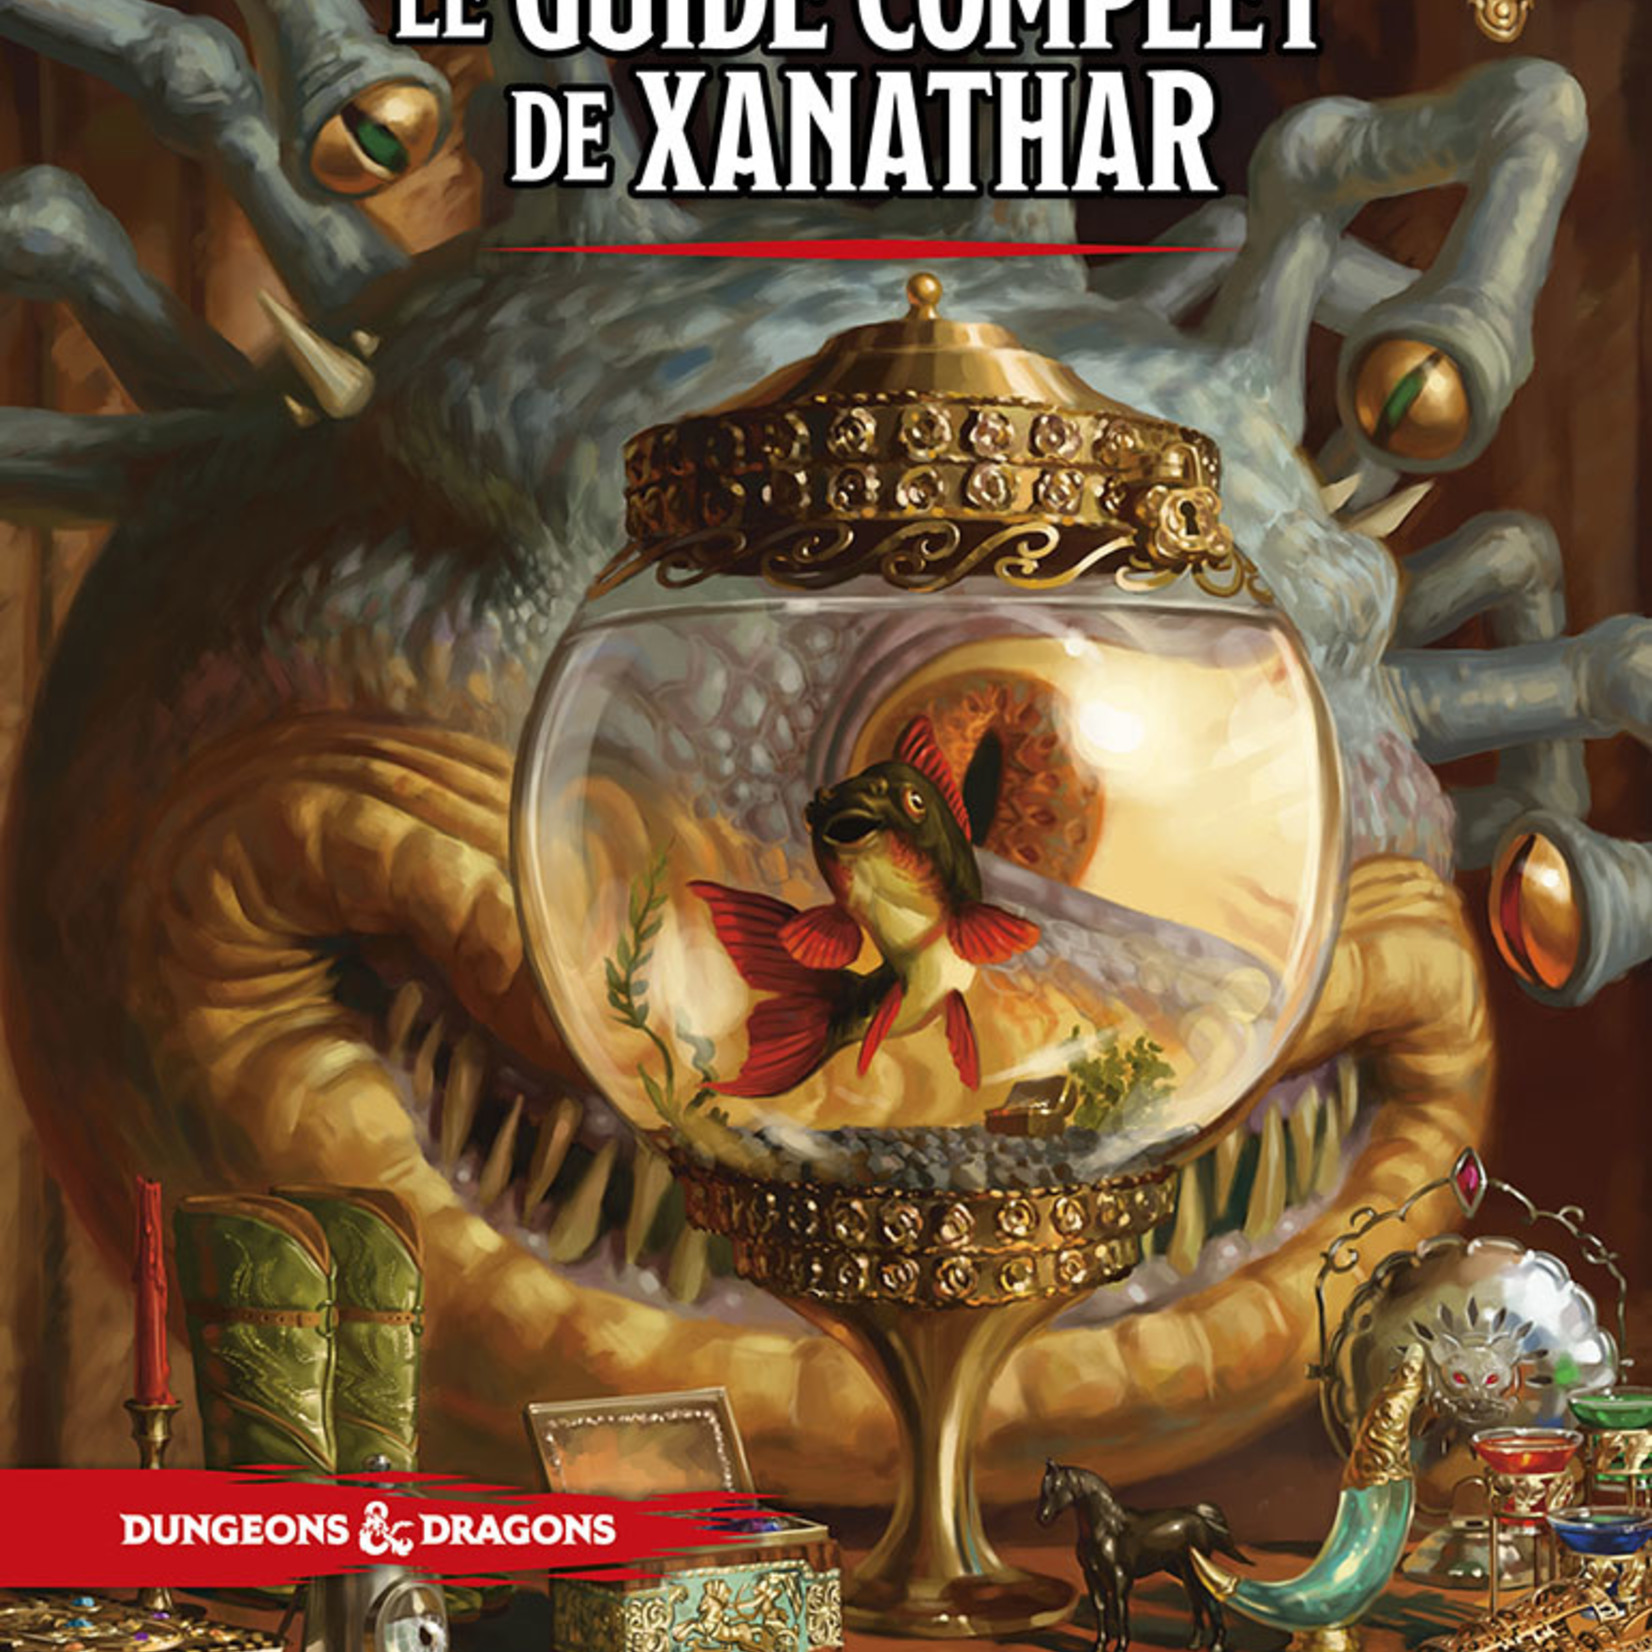 Wizards of the Coast Donjons & Dragons 5e édition - Le guide complet de Xanathar